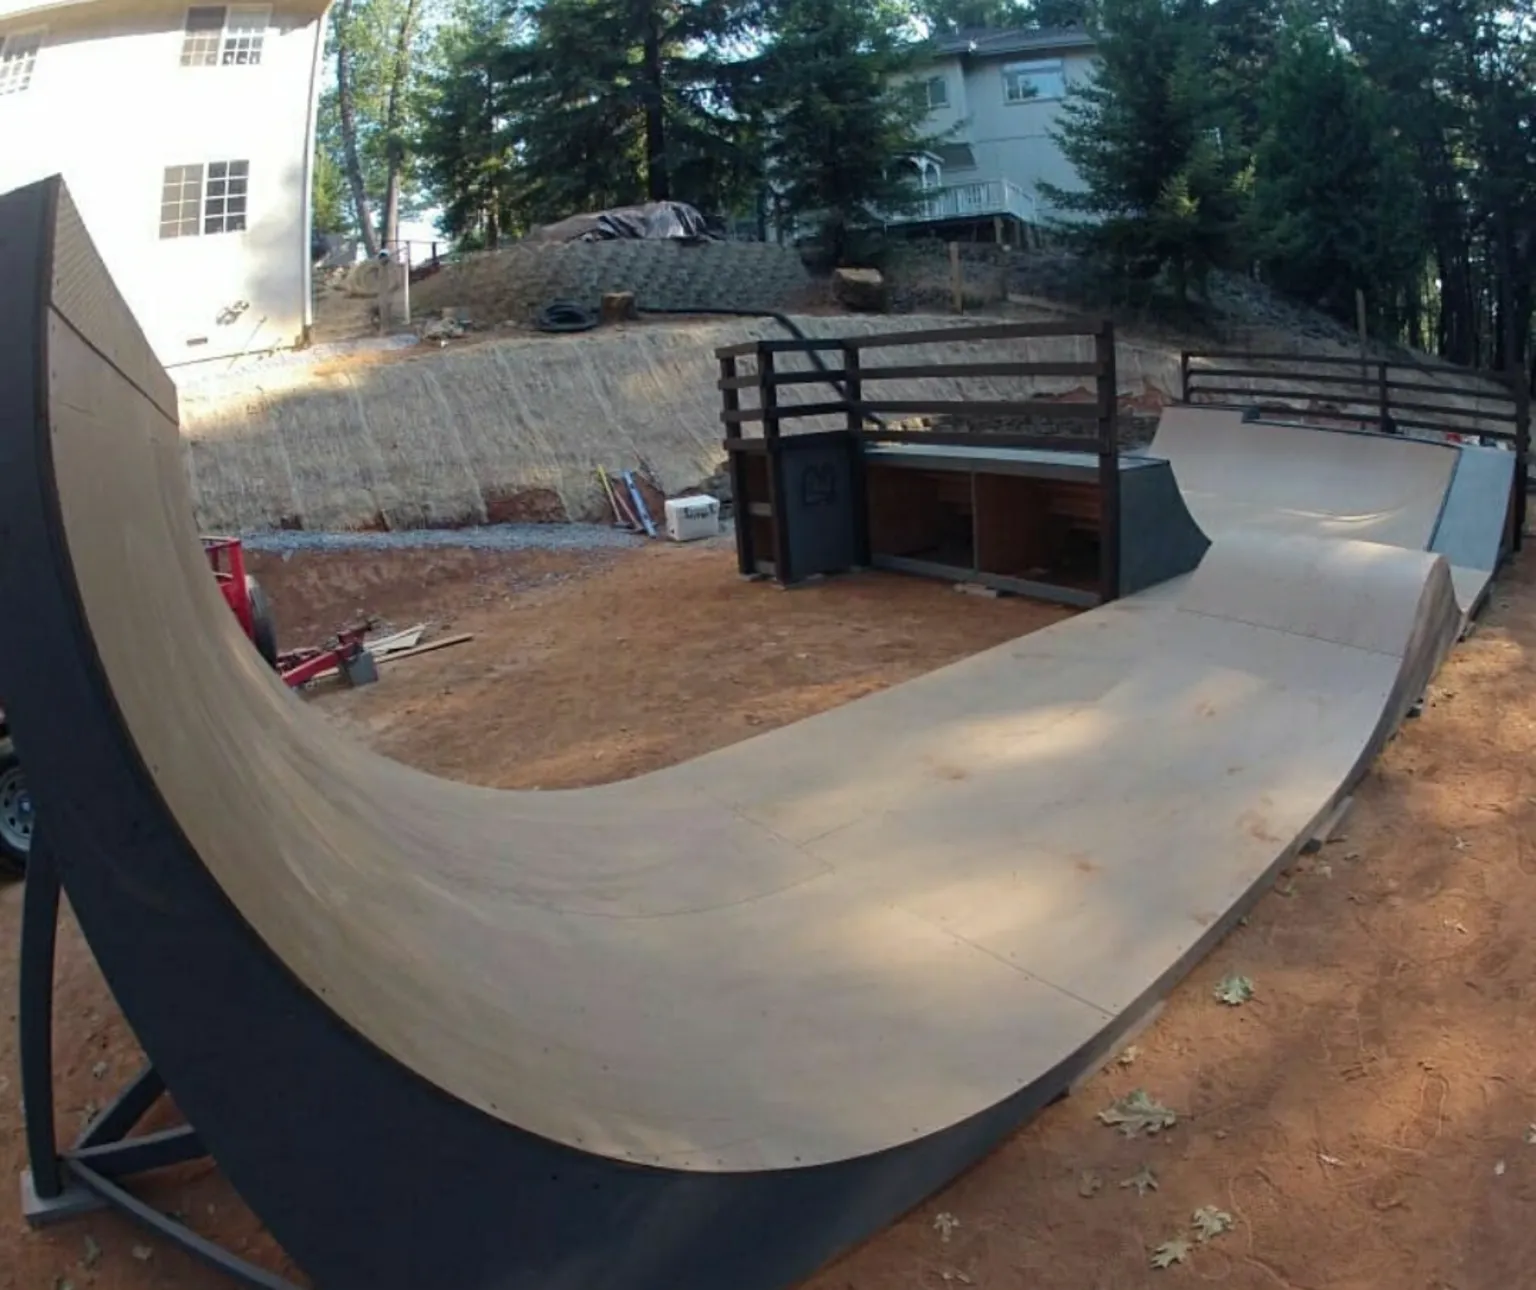 Side view of custom backyard flow park with extensions, sloping coping, bowled corner, and pump bump